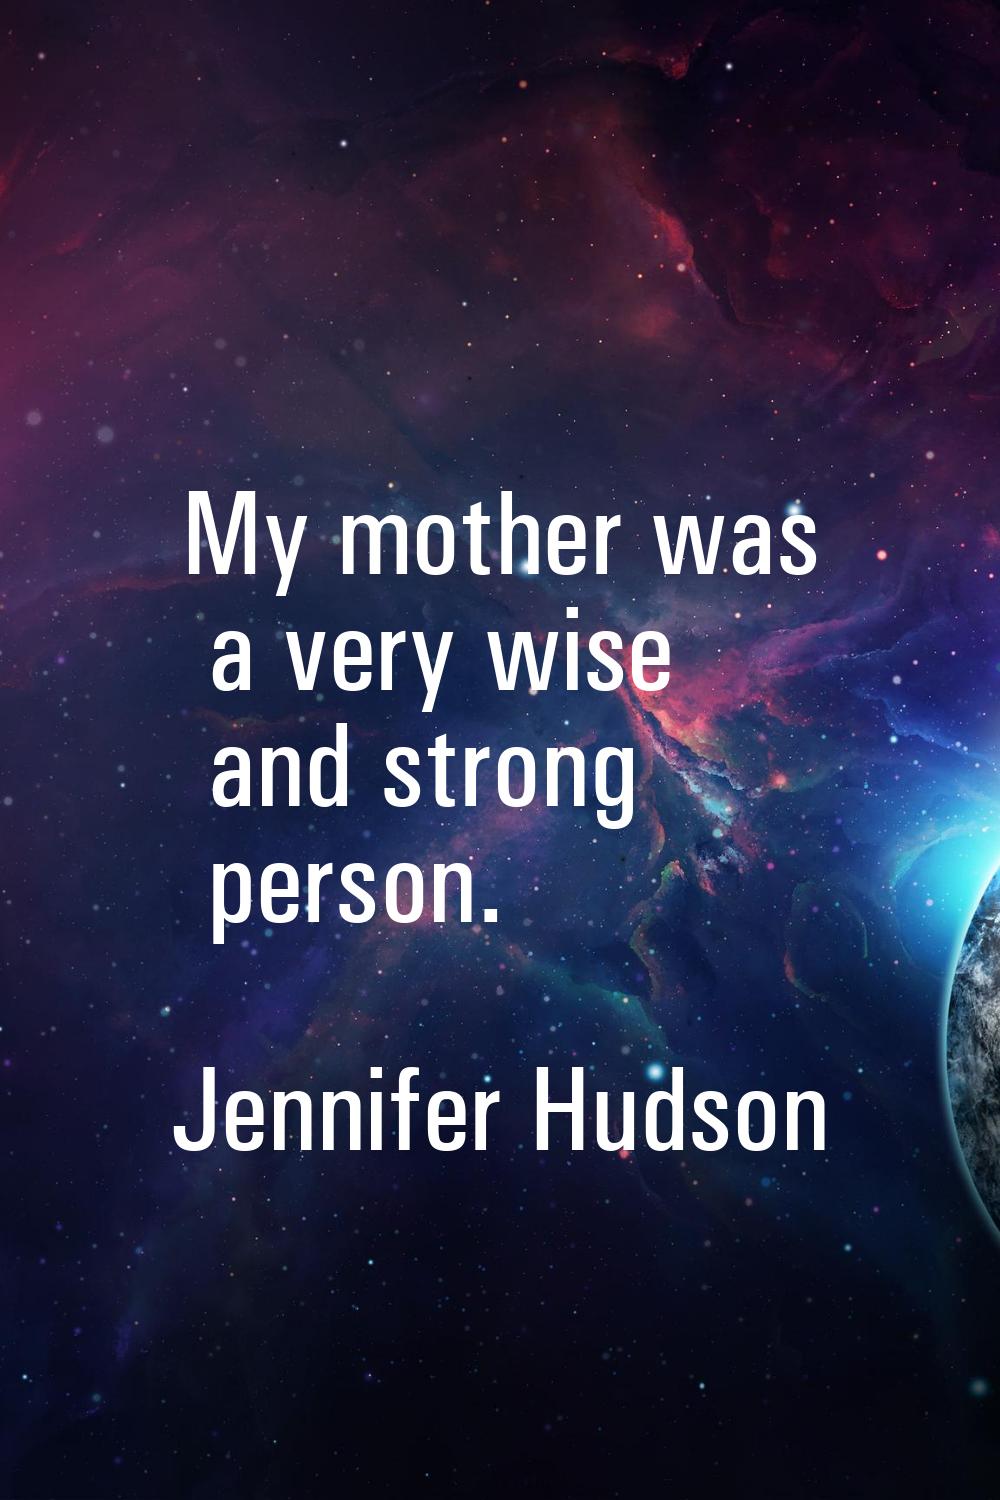 My mother was a very wise and strong person.